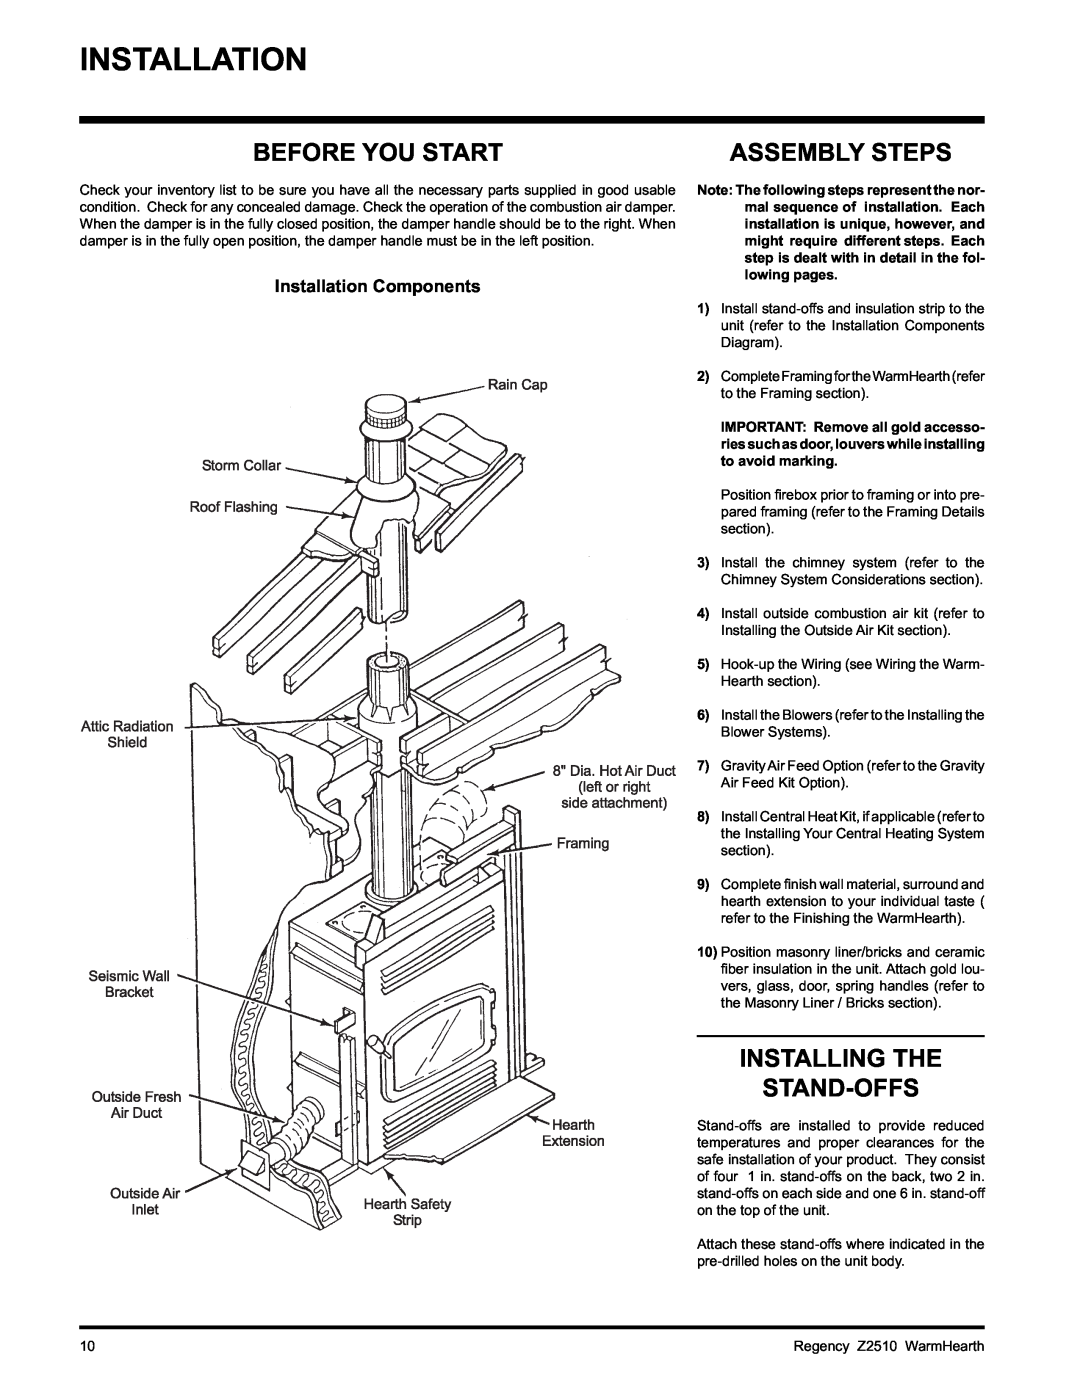 Regency Z2510L installation manual Before You Start, Installing The Stand-Offs, Assembly Steps, Installation Components 